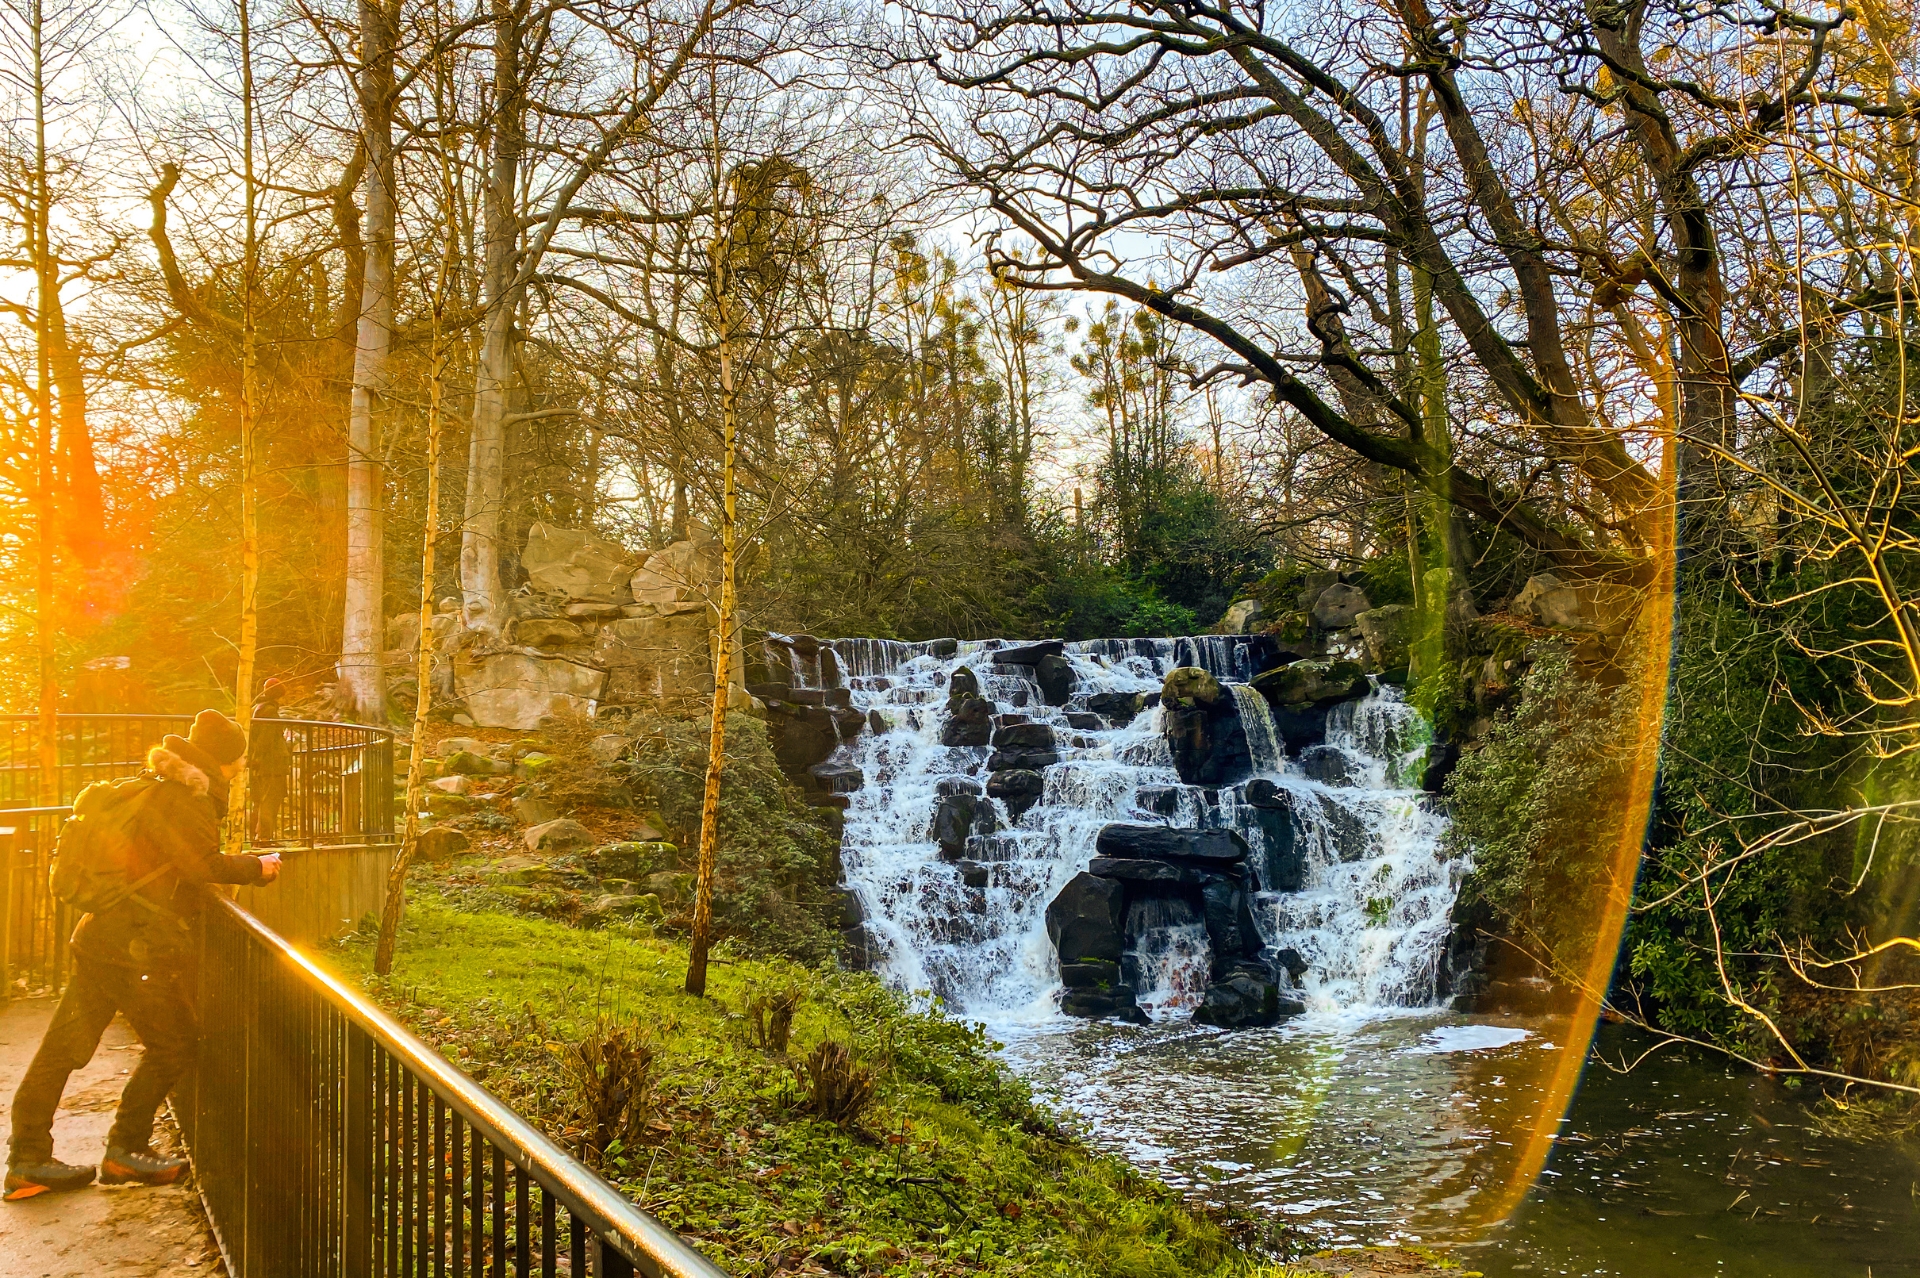 Man leaning on a metal fence looking at a waterfall surrounded by trees. The sun flares on the lens of the camera